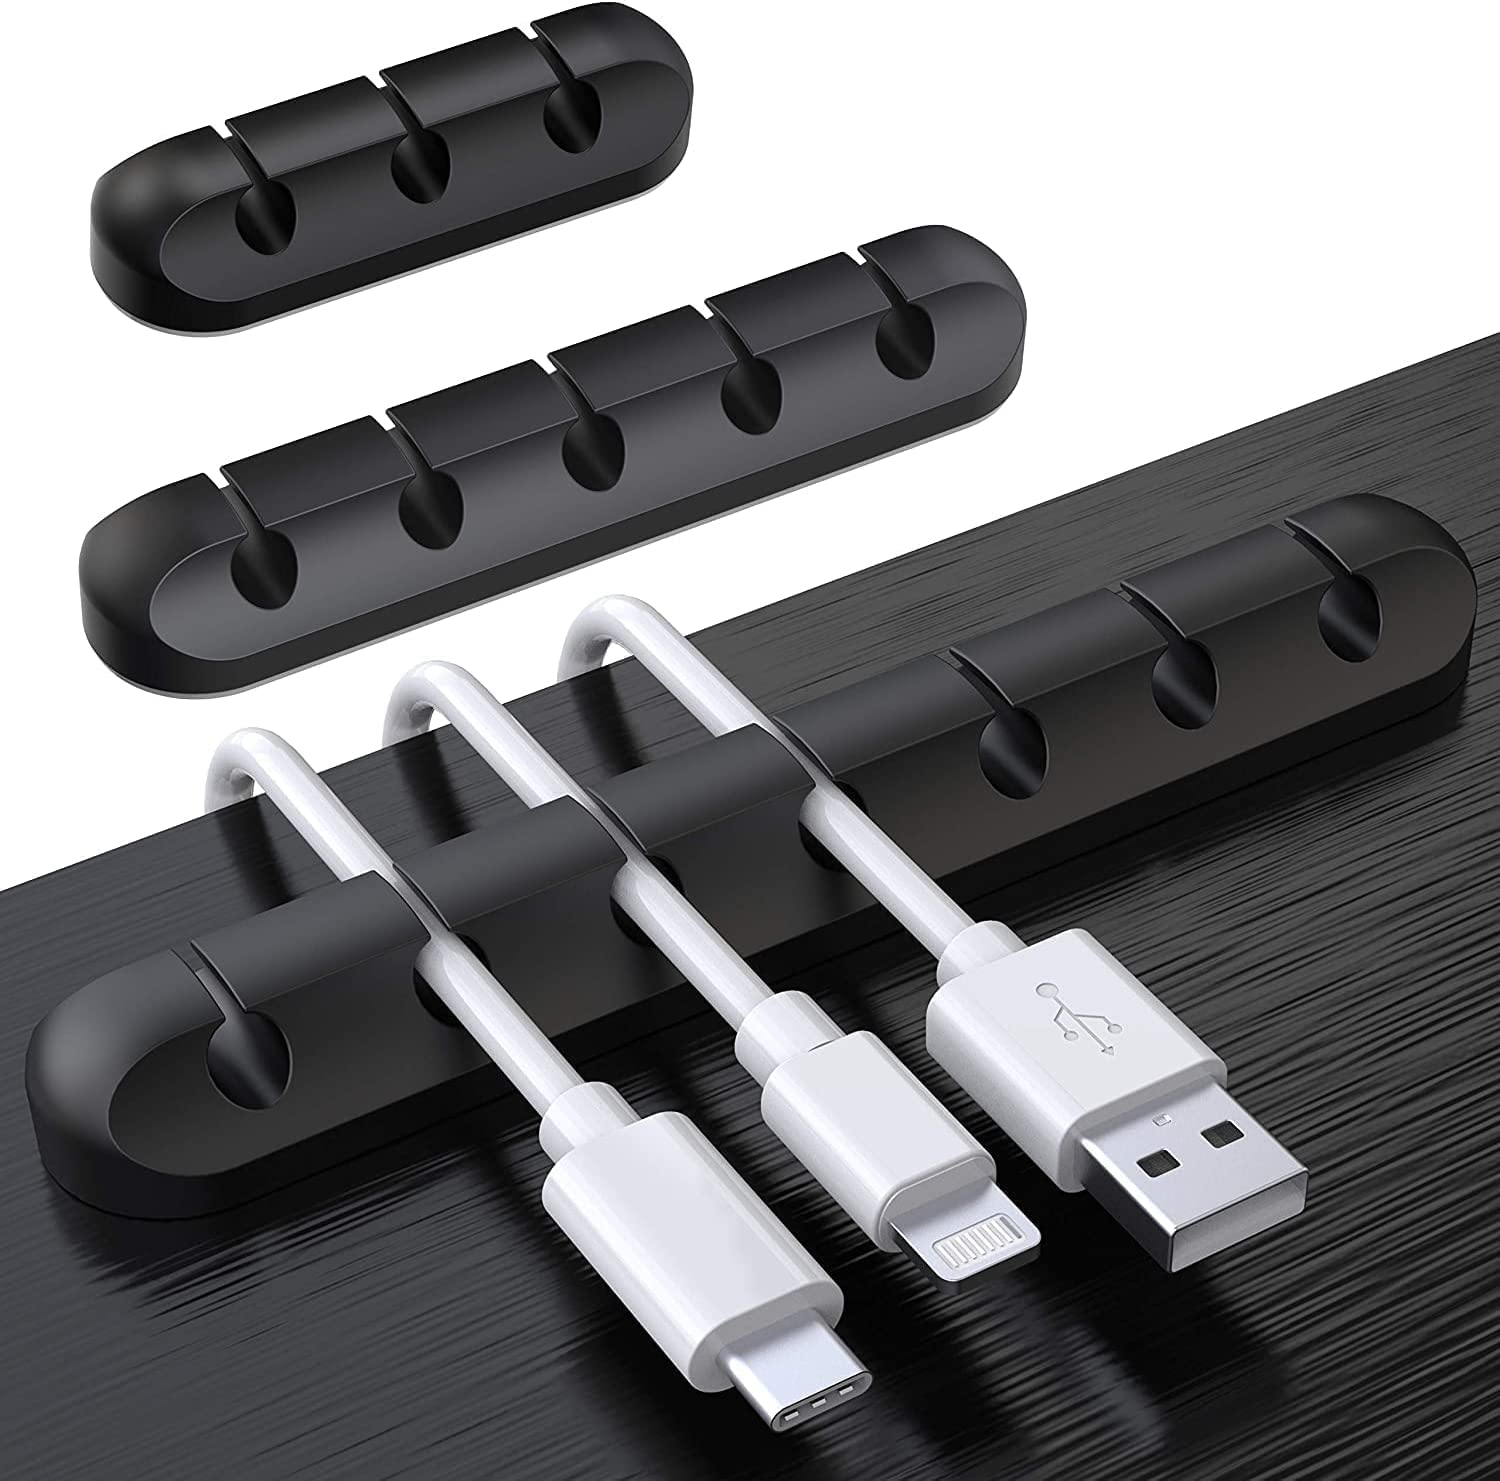 Cable Holder Clips 3 Pack Cable Management Cord Organiser Clips Silicone Adhesive for USB Charging Cable Mouse Wire PC Office Home